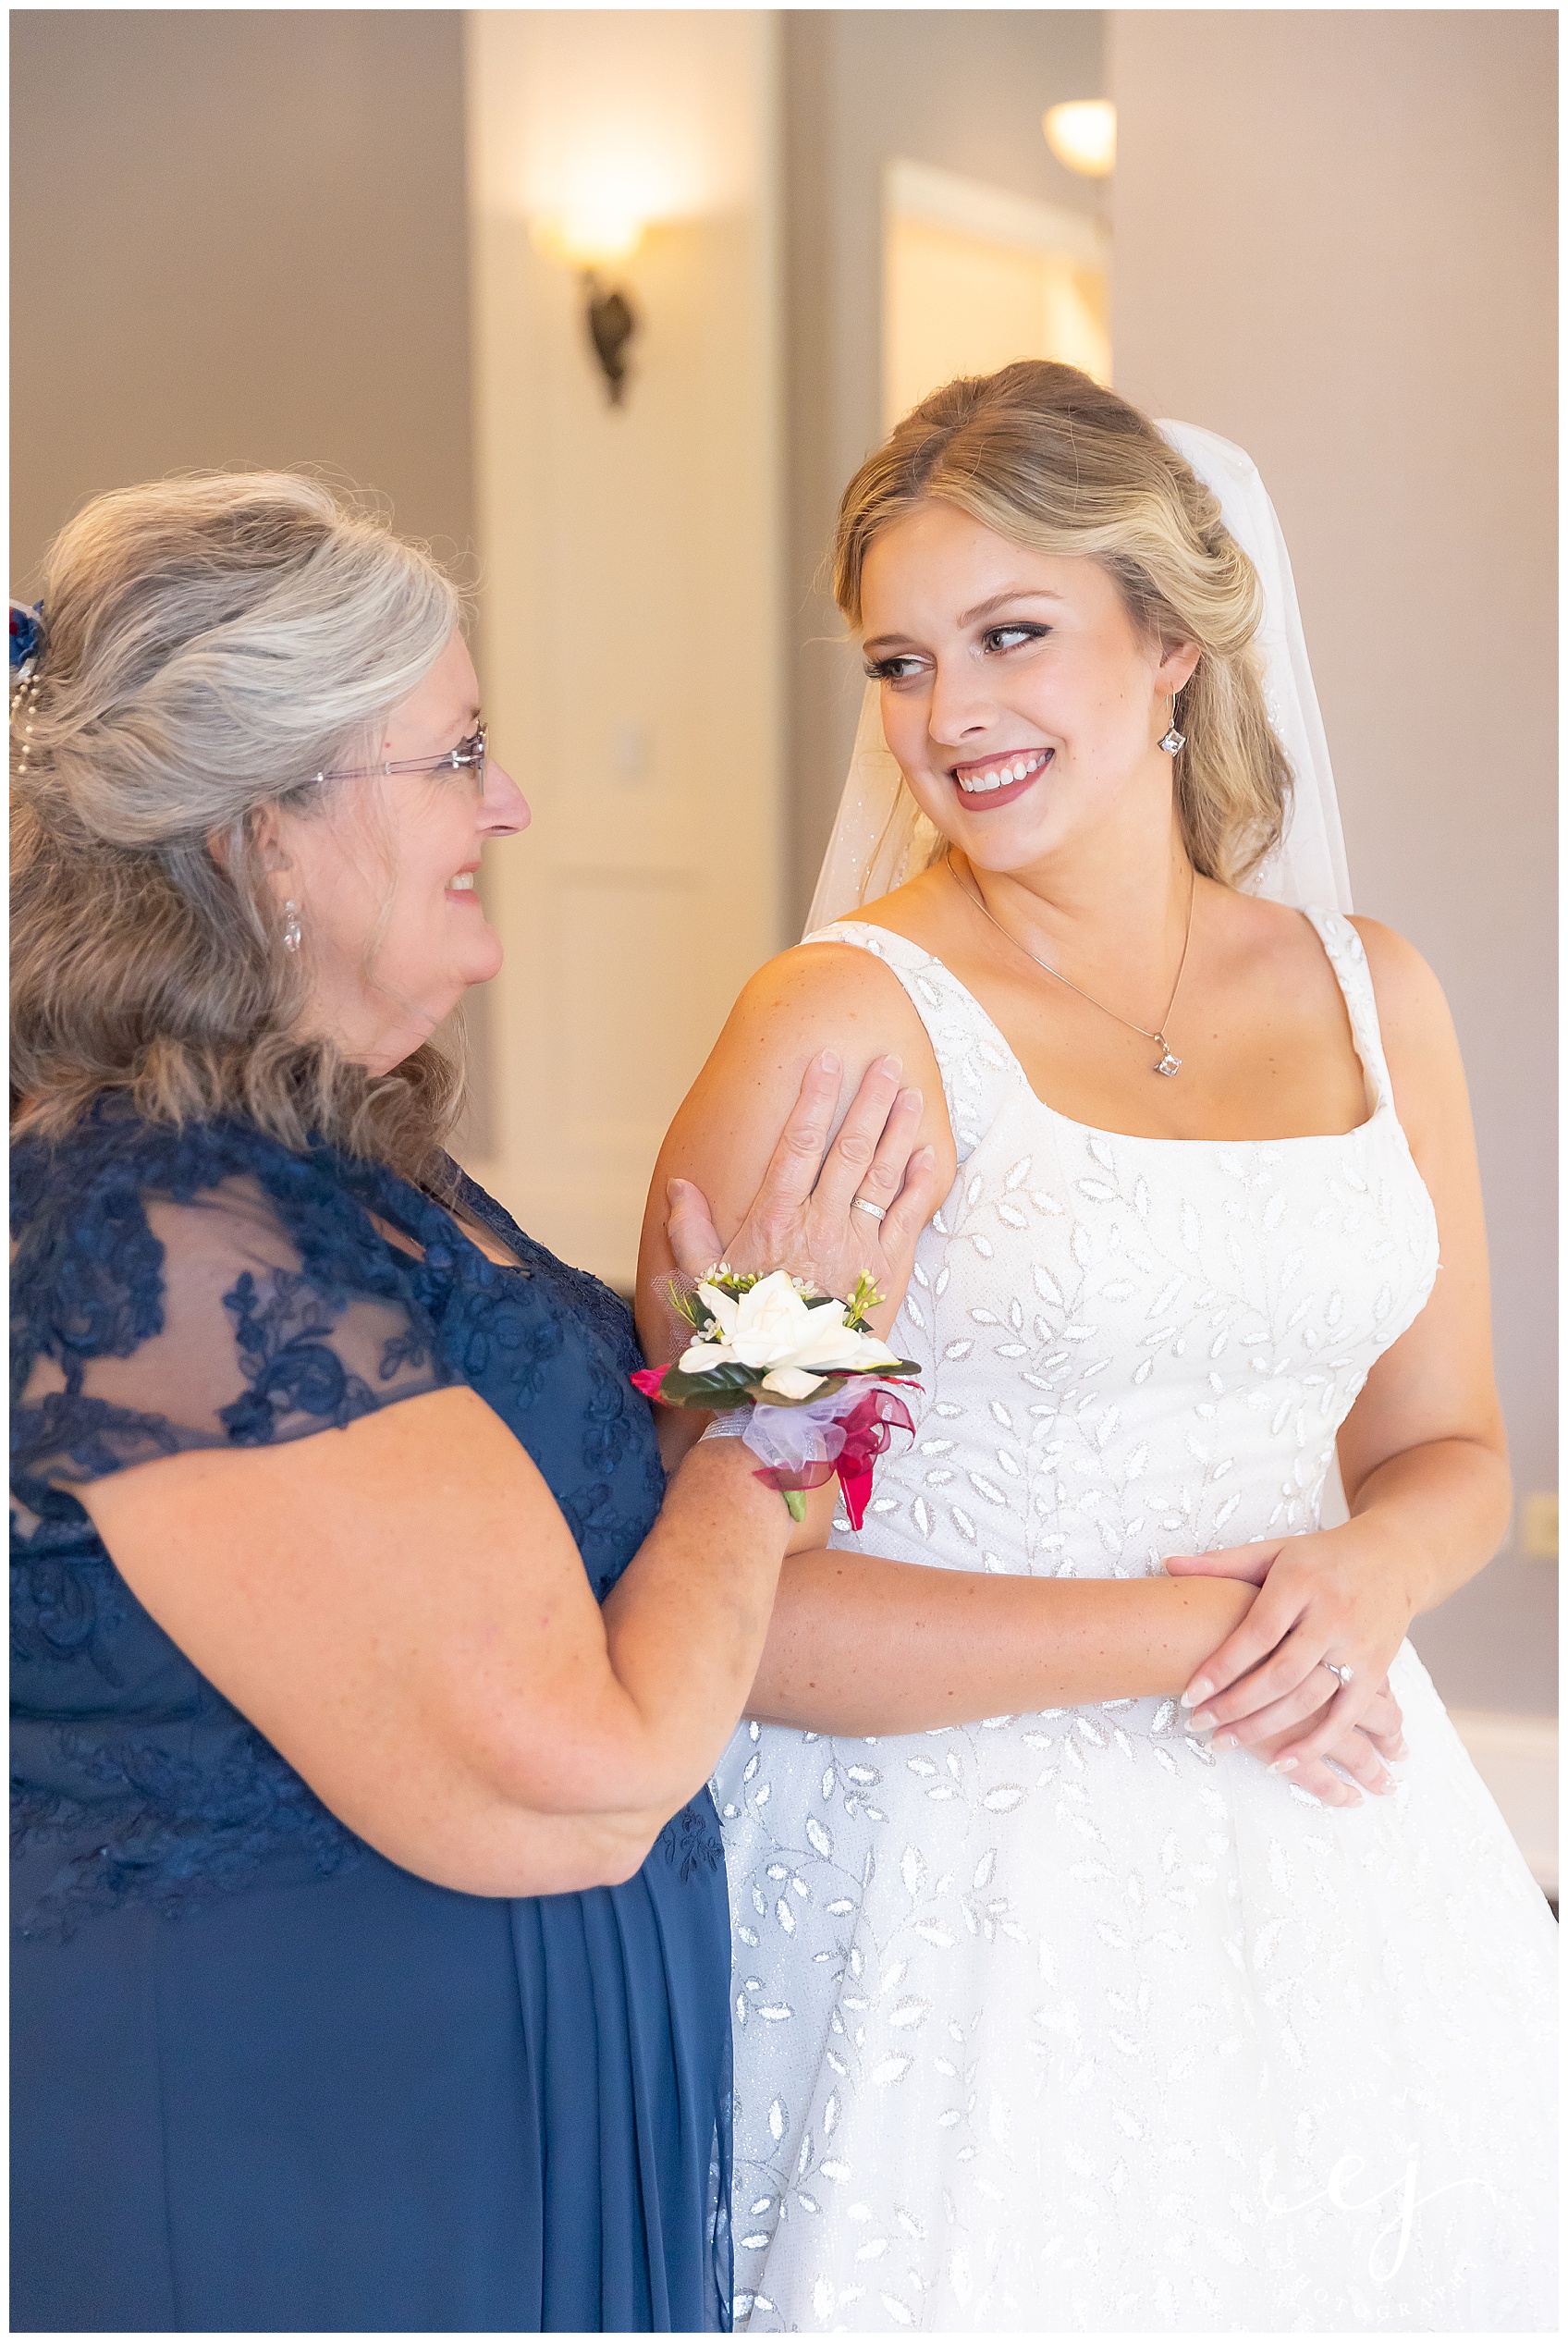 sweet moment of mom and daughter getting ready for wedding